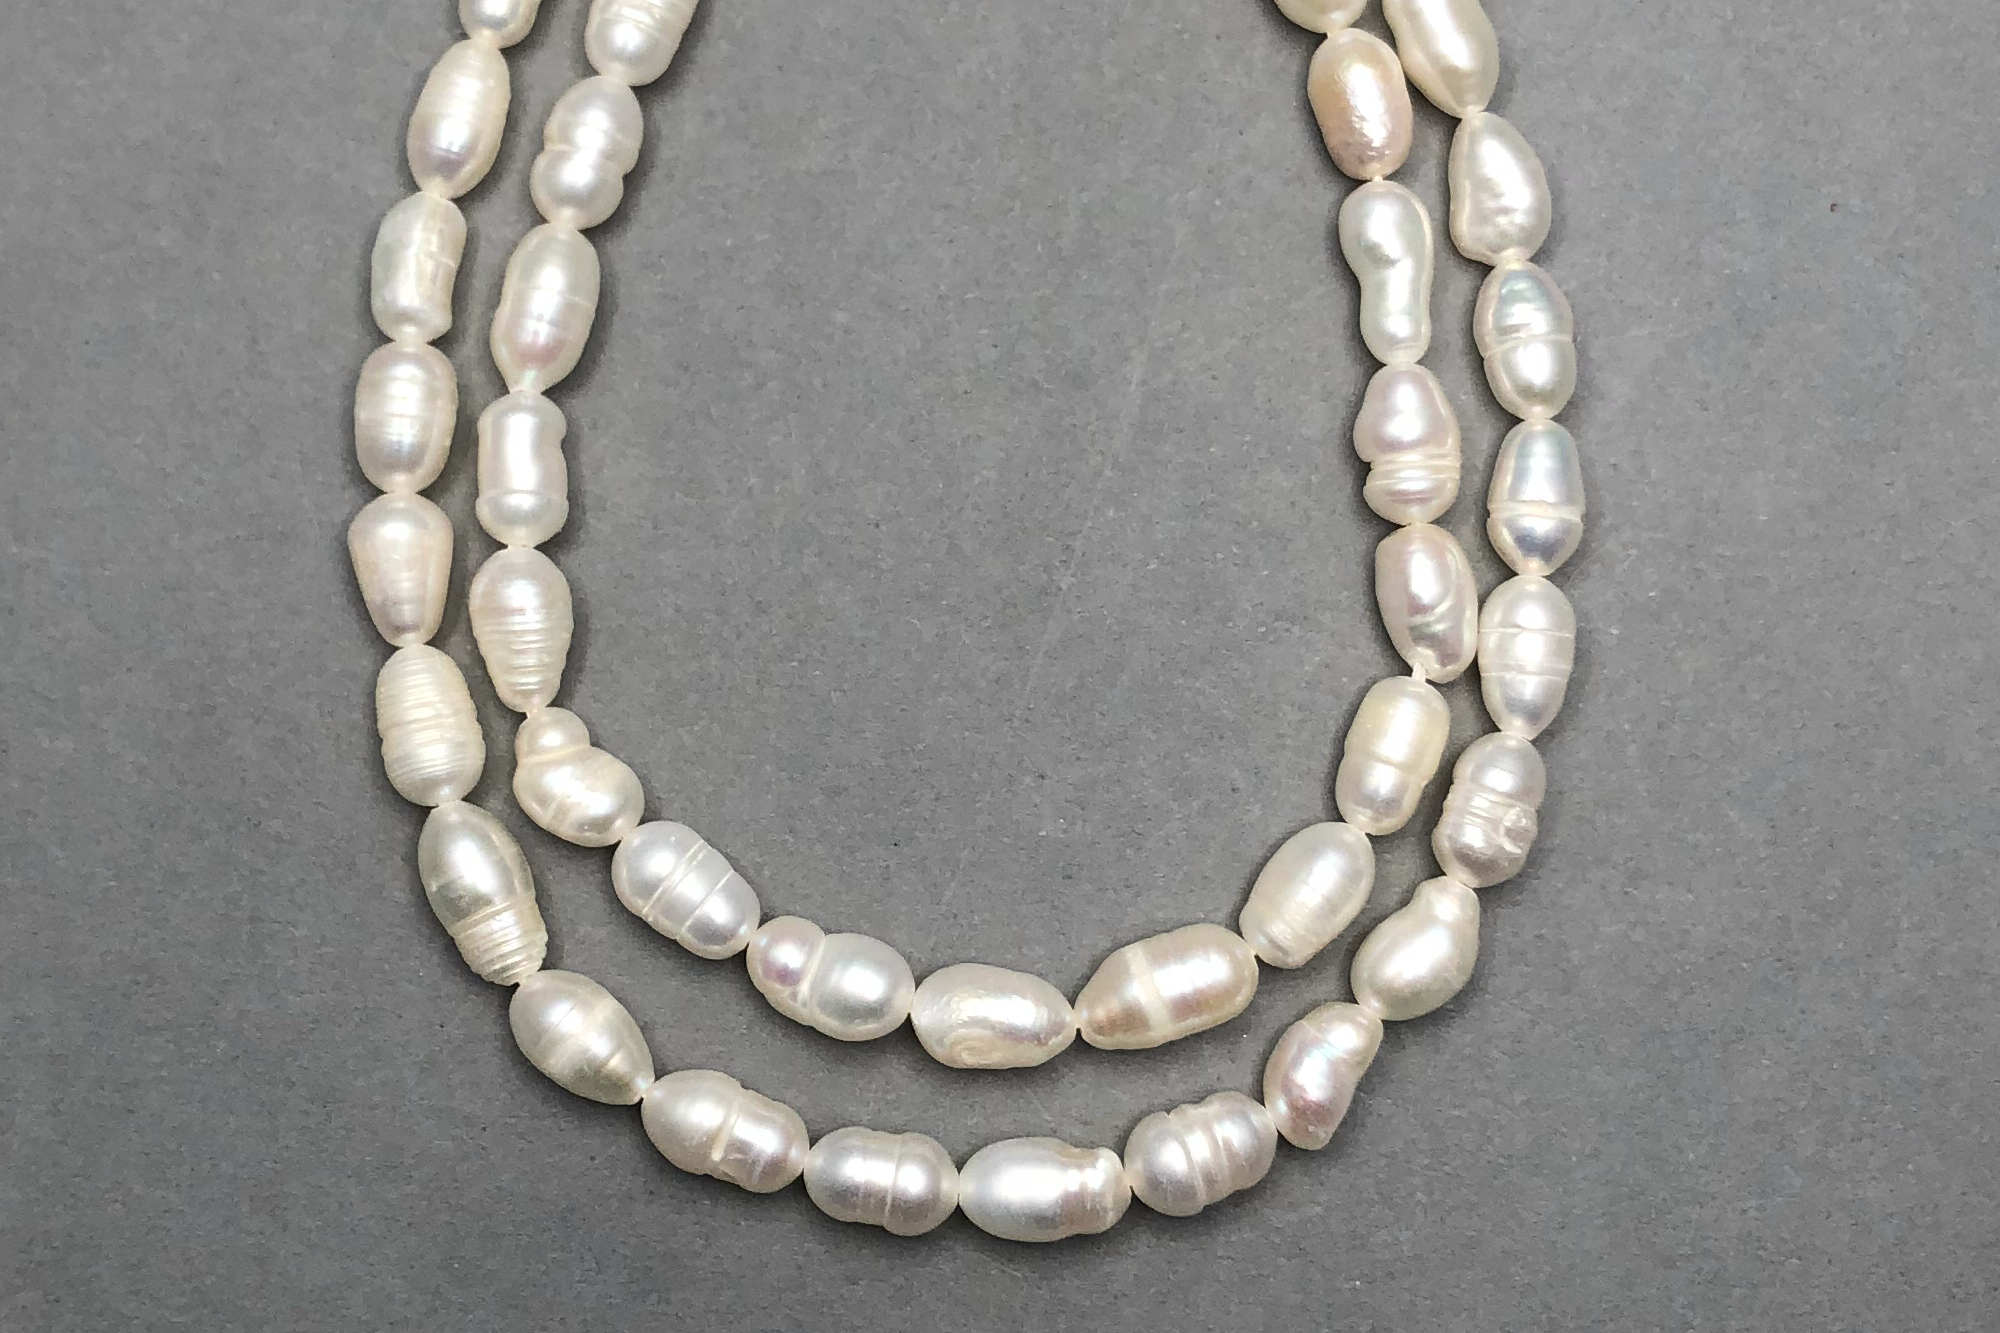 Natural Ivory Fresh Water Pearls, 33cm Strand, Circled/Elongated approx. 8x5mm